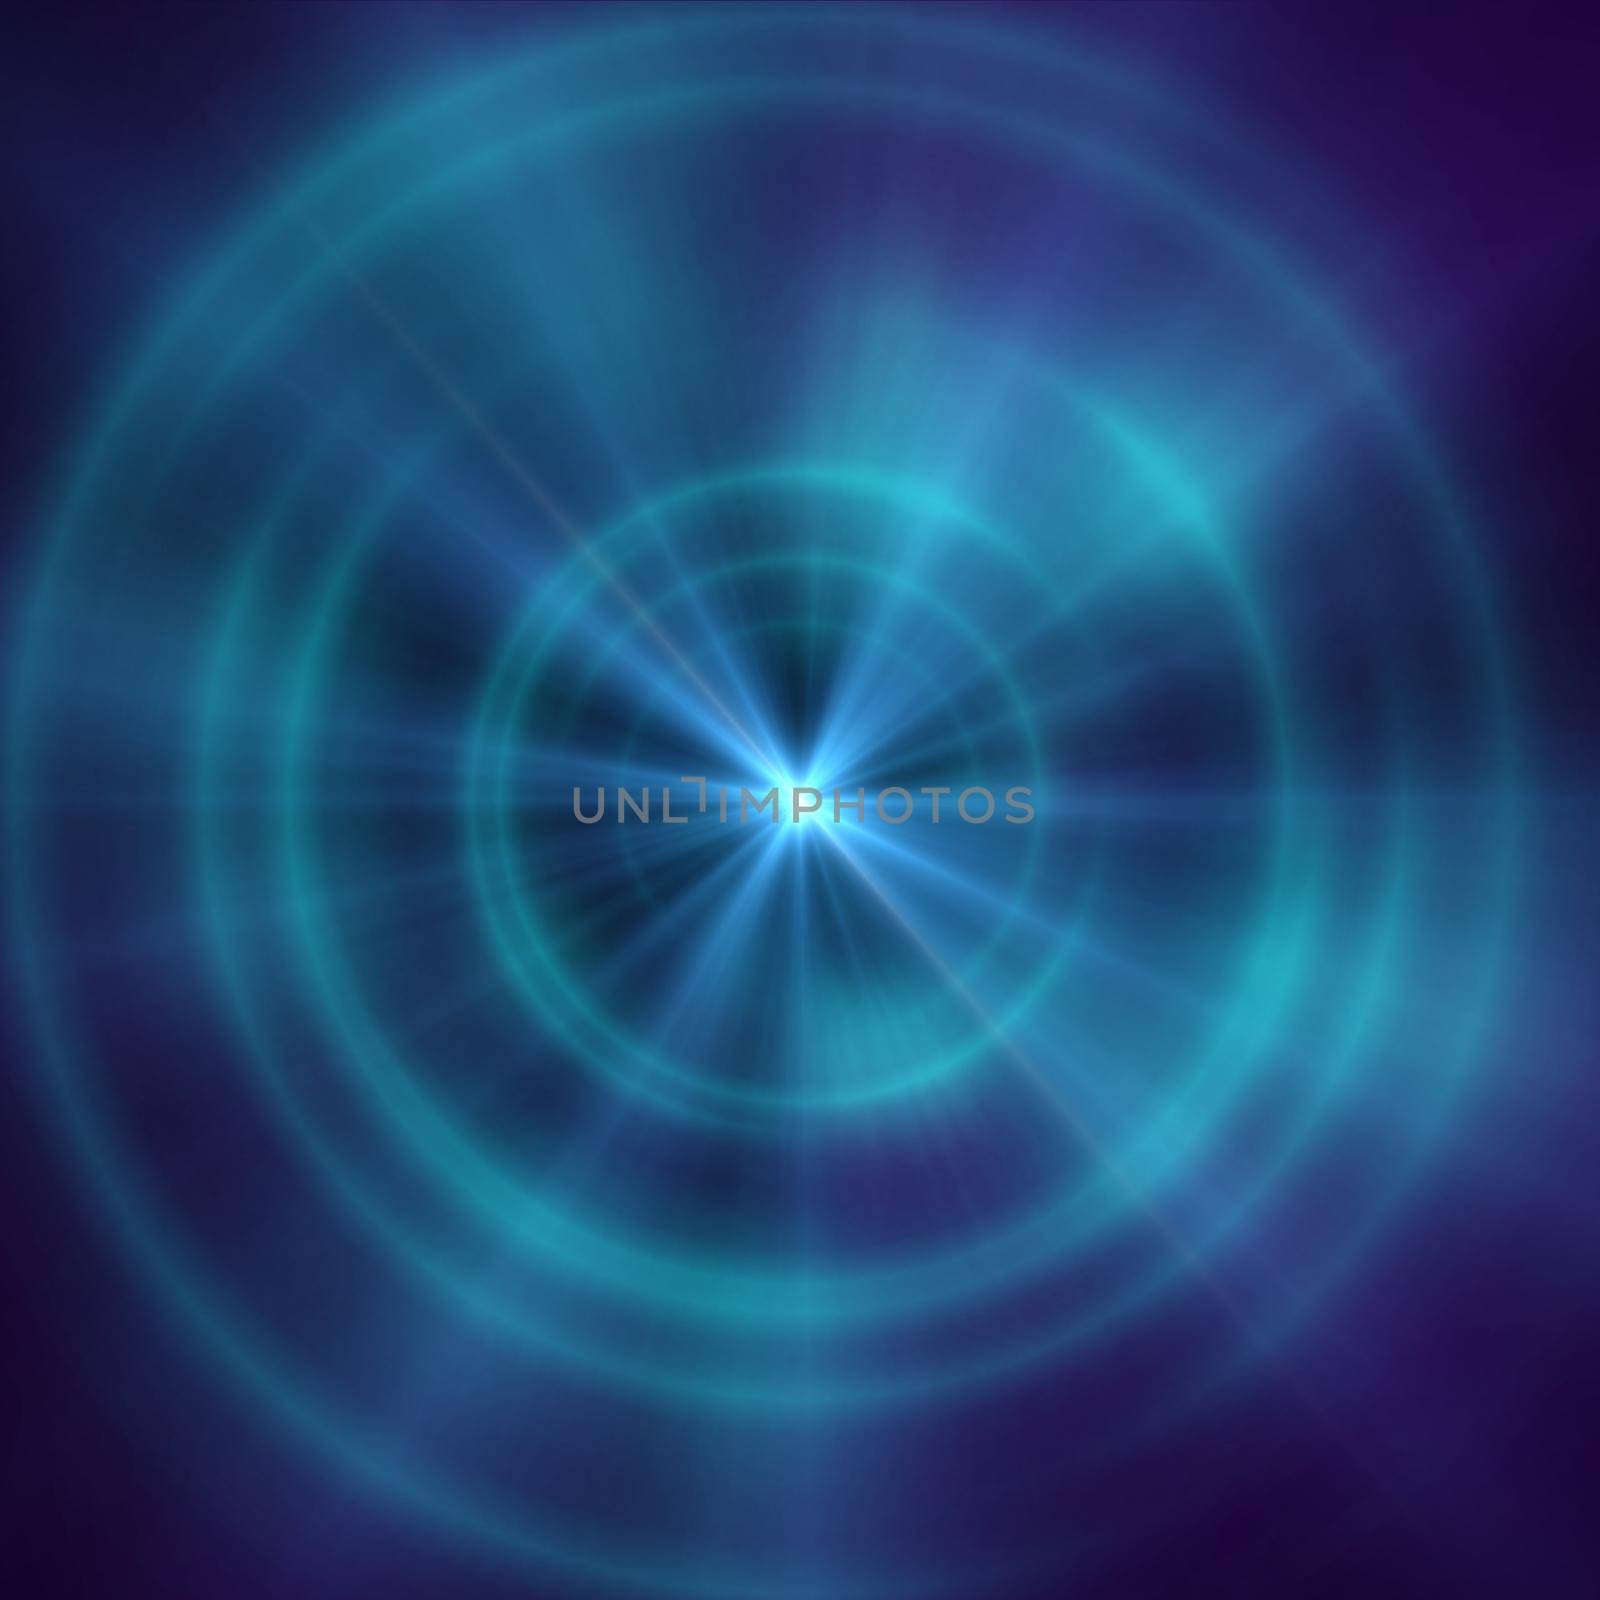 Round concrete tunnel with light ray ring, abstract illustration